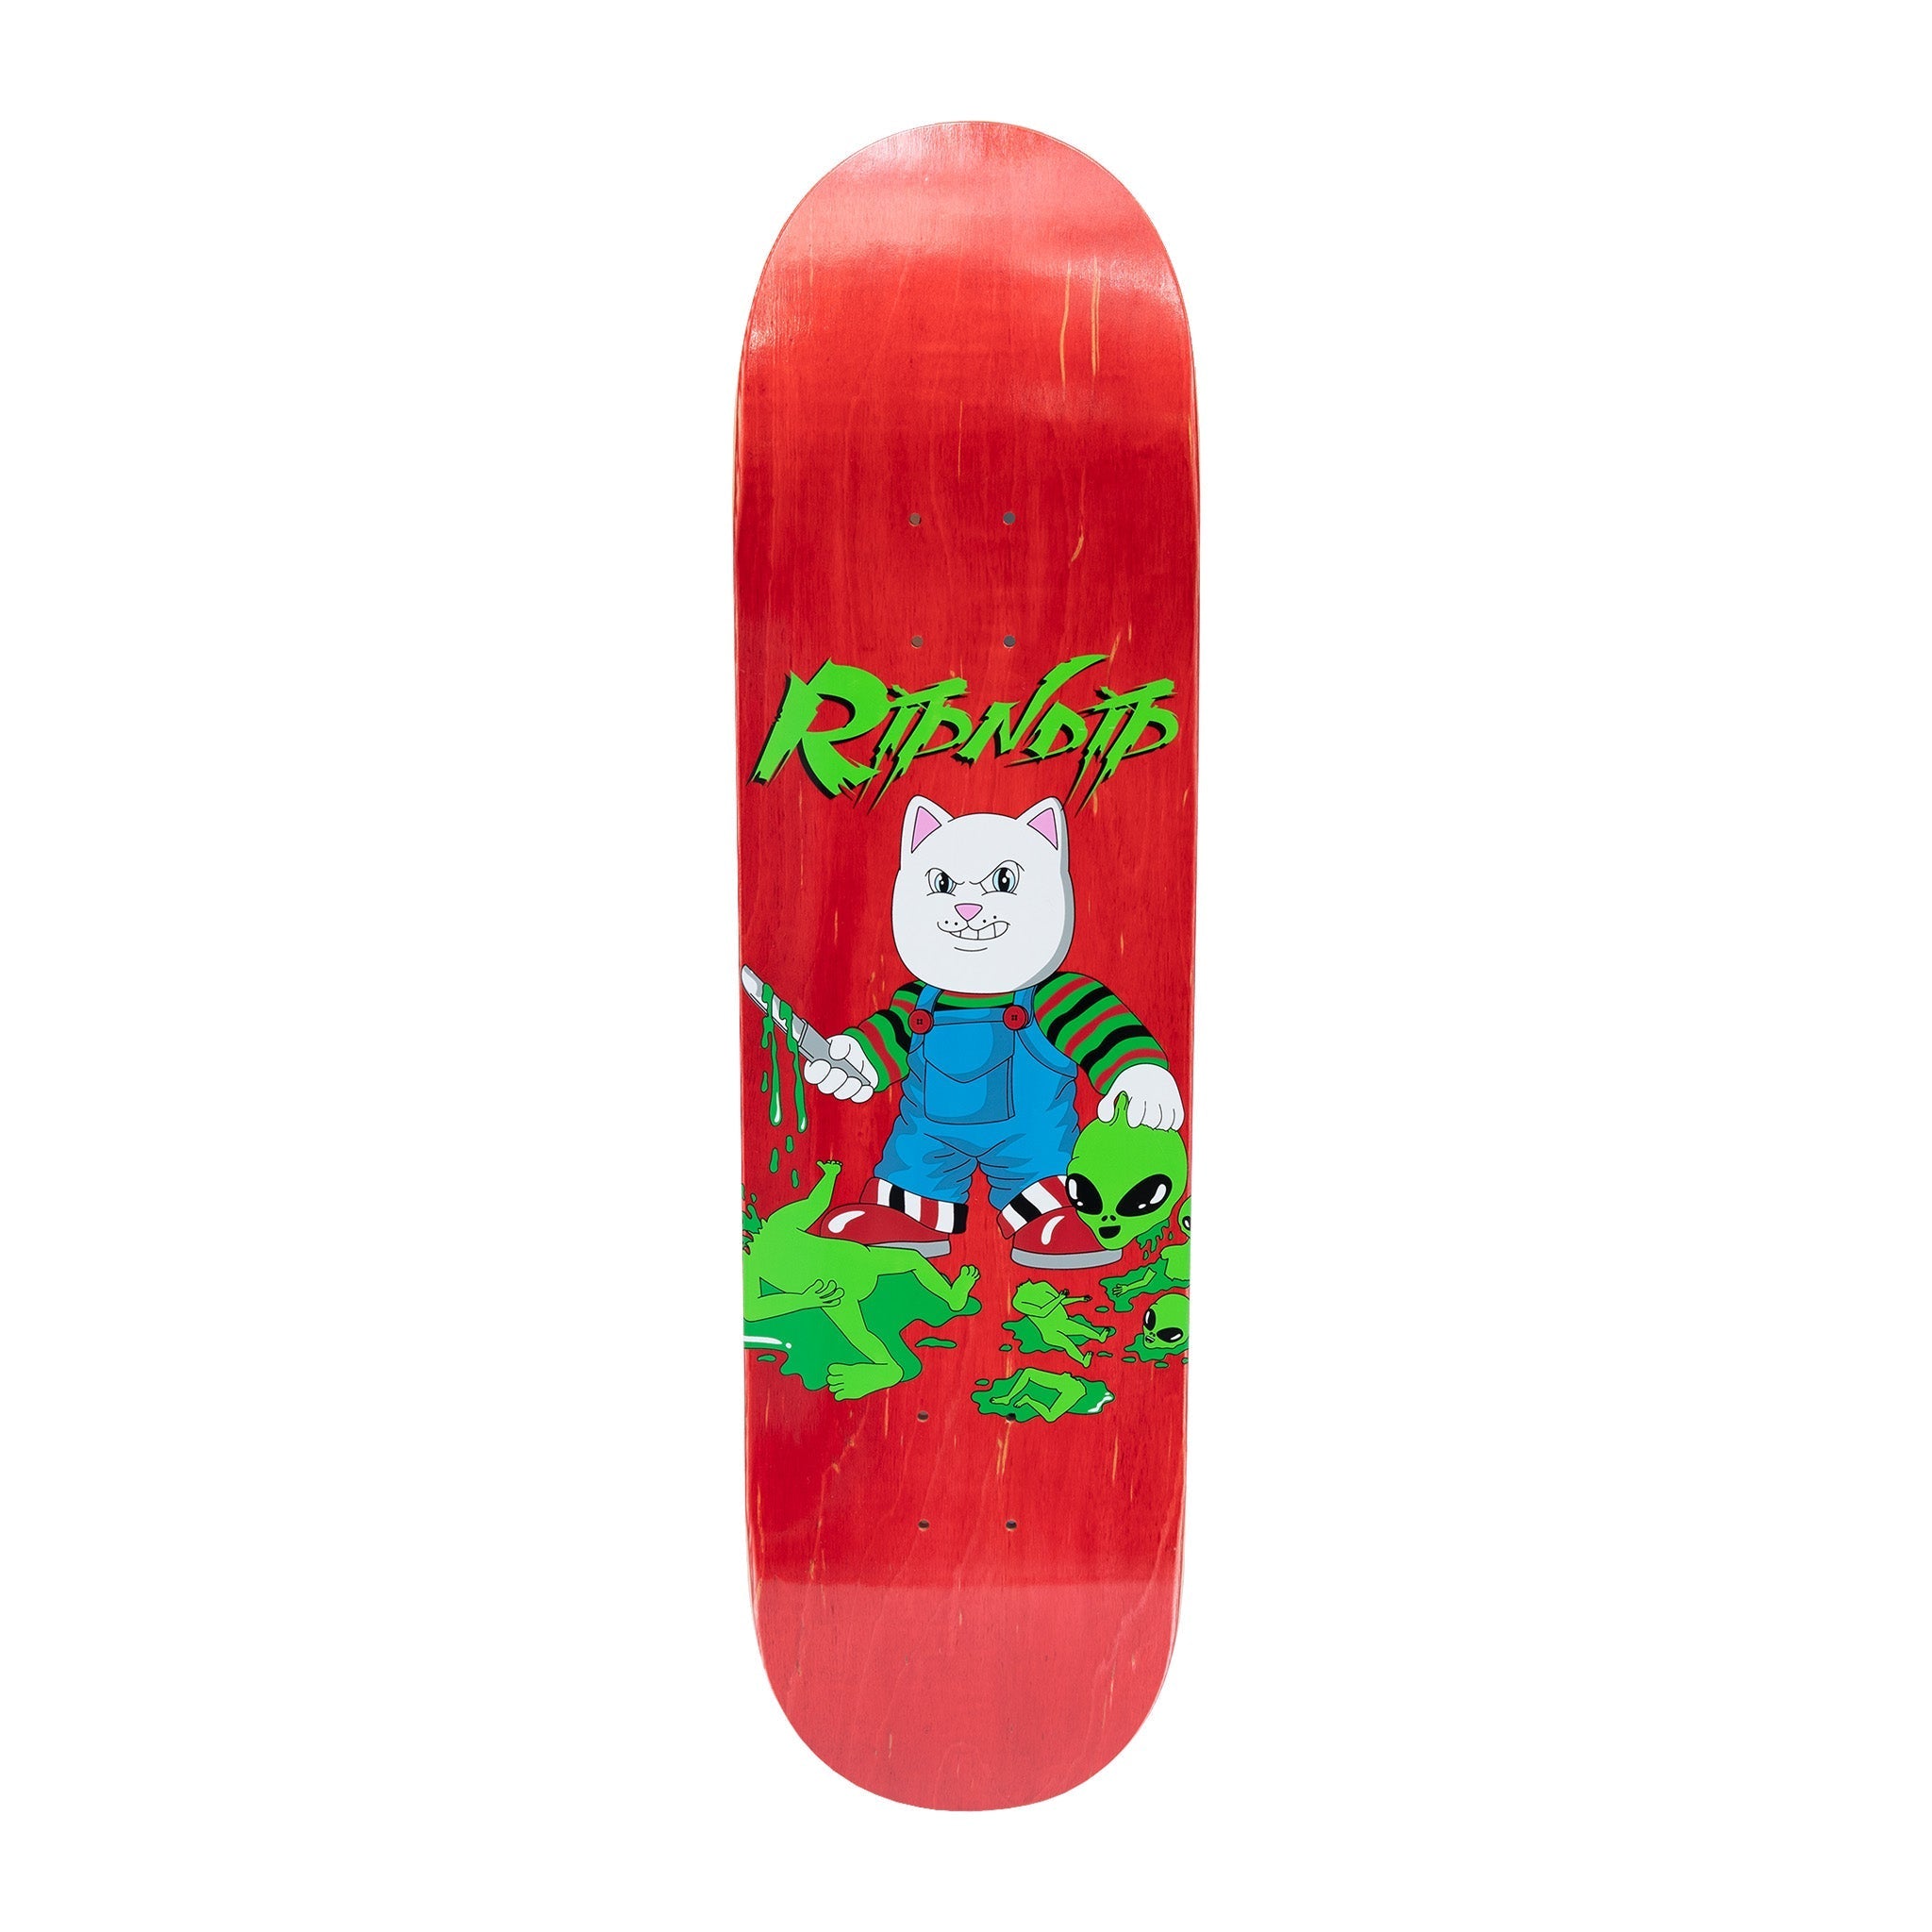 Childs Play Board (Red)